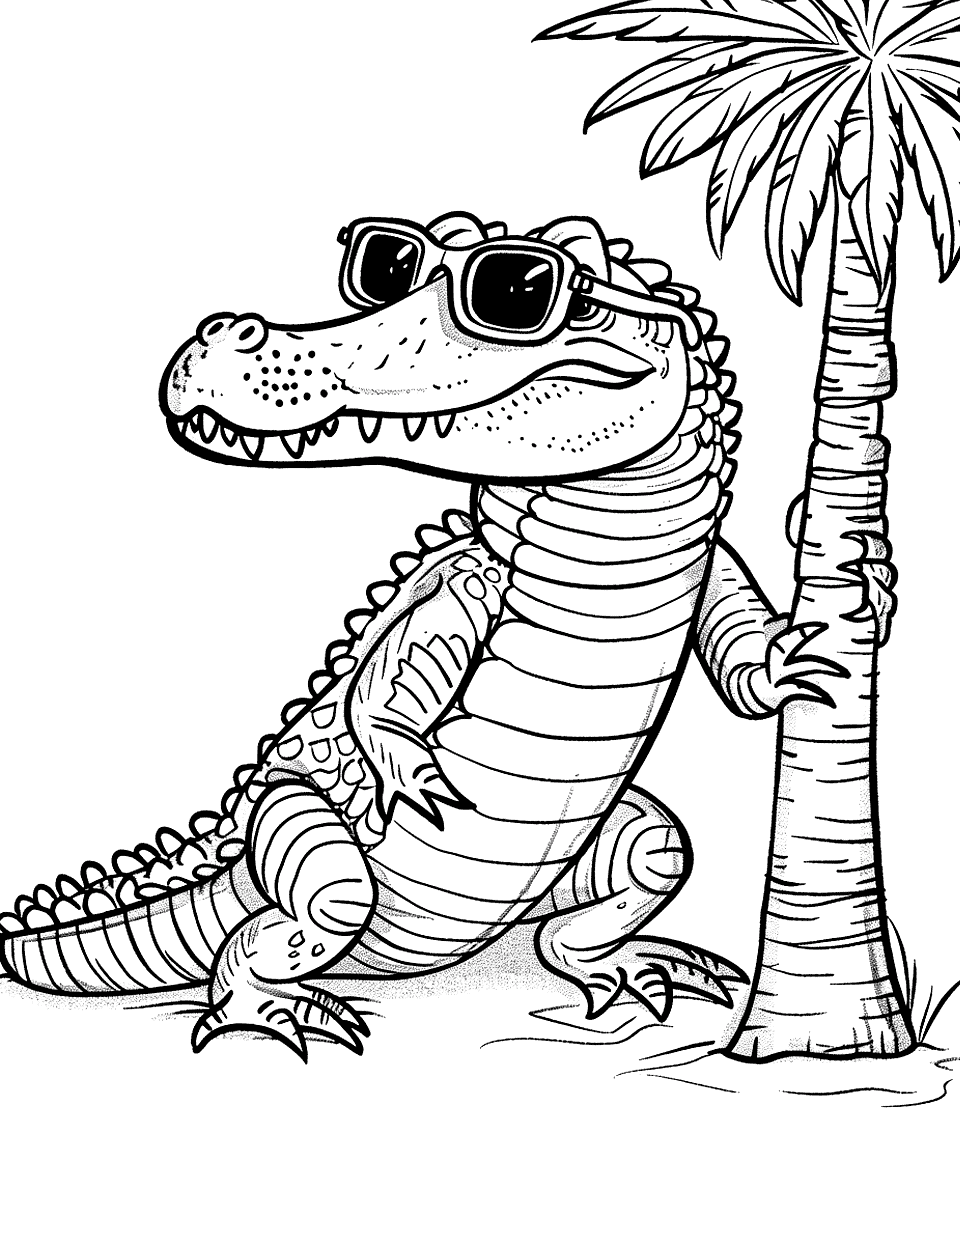 Cool Alligator with Sunglasses Coloring Page - An alligator wearing stylish sunglasses and leaning against a palm tree.